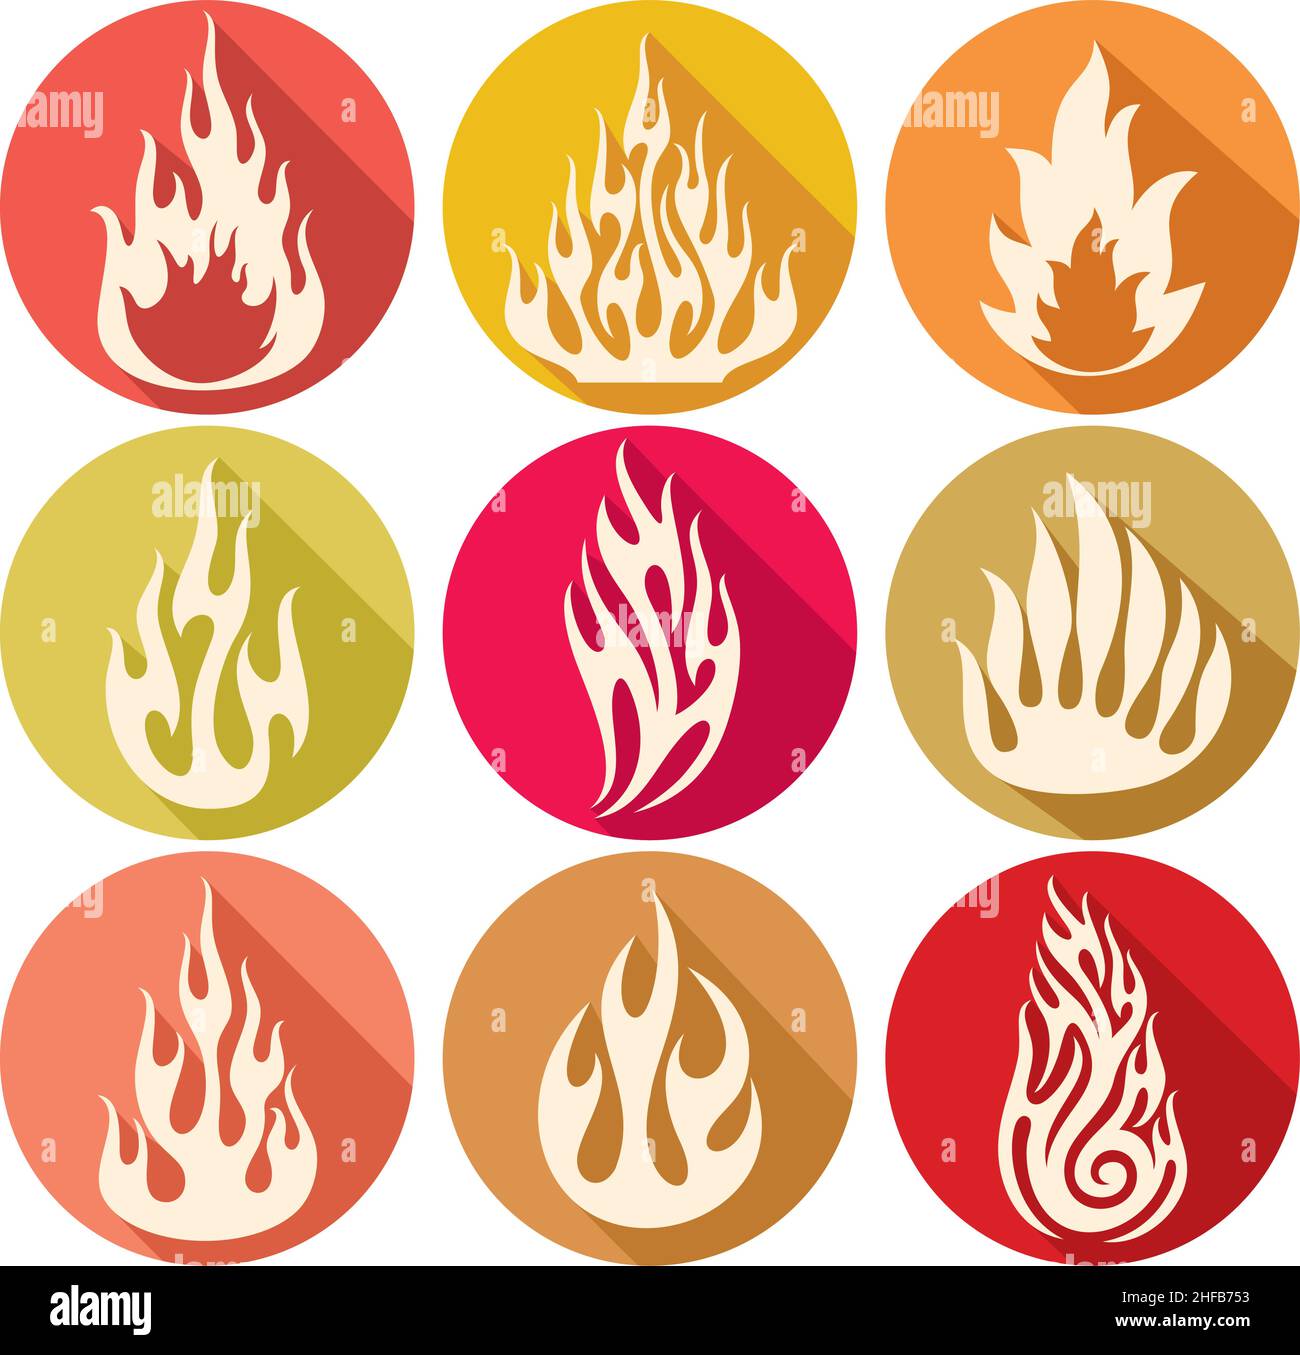 Set of vector flames icons Stock Vector